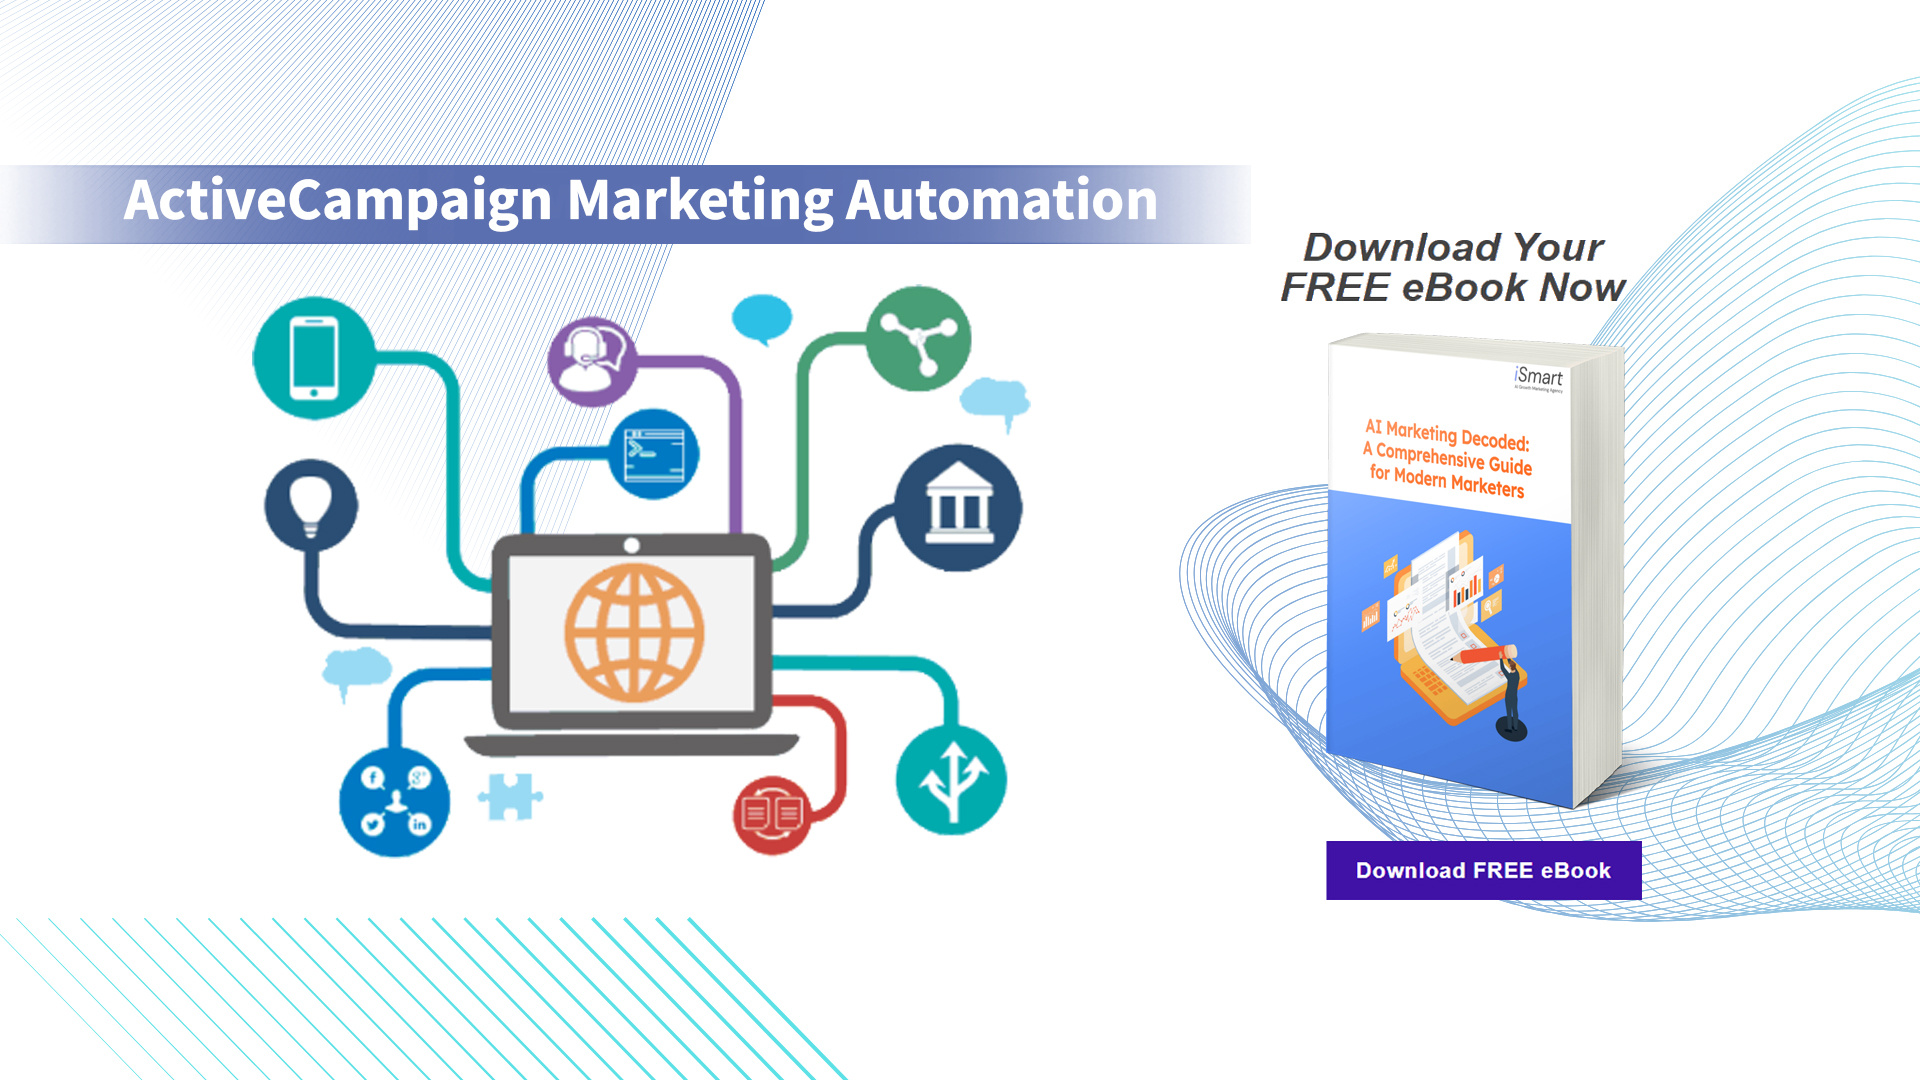 ActiveCampaign Marketing Automation